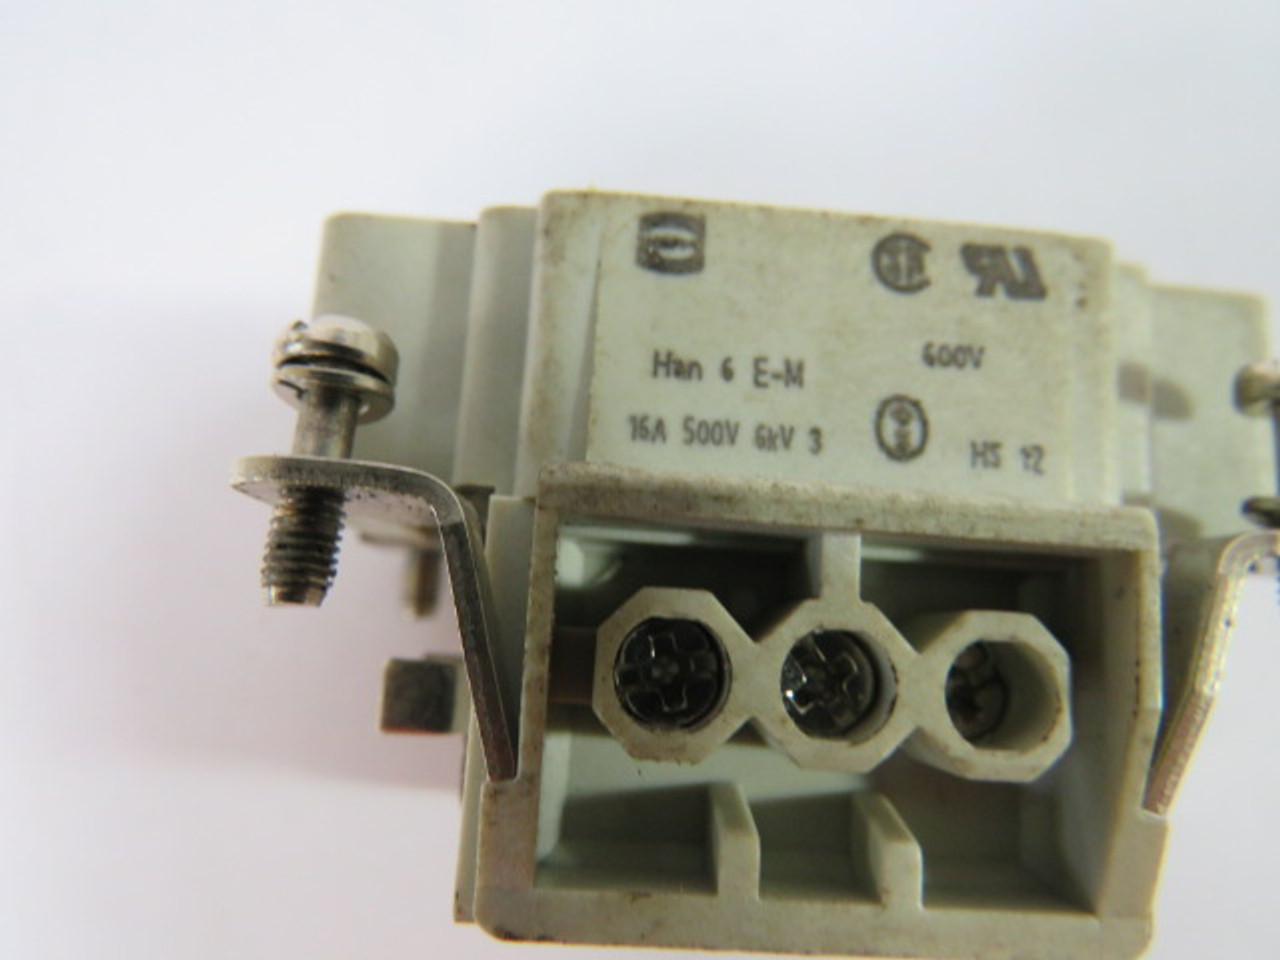 Harting HAN 6 E-M 16A 500V 6-Pin Male Connector USED